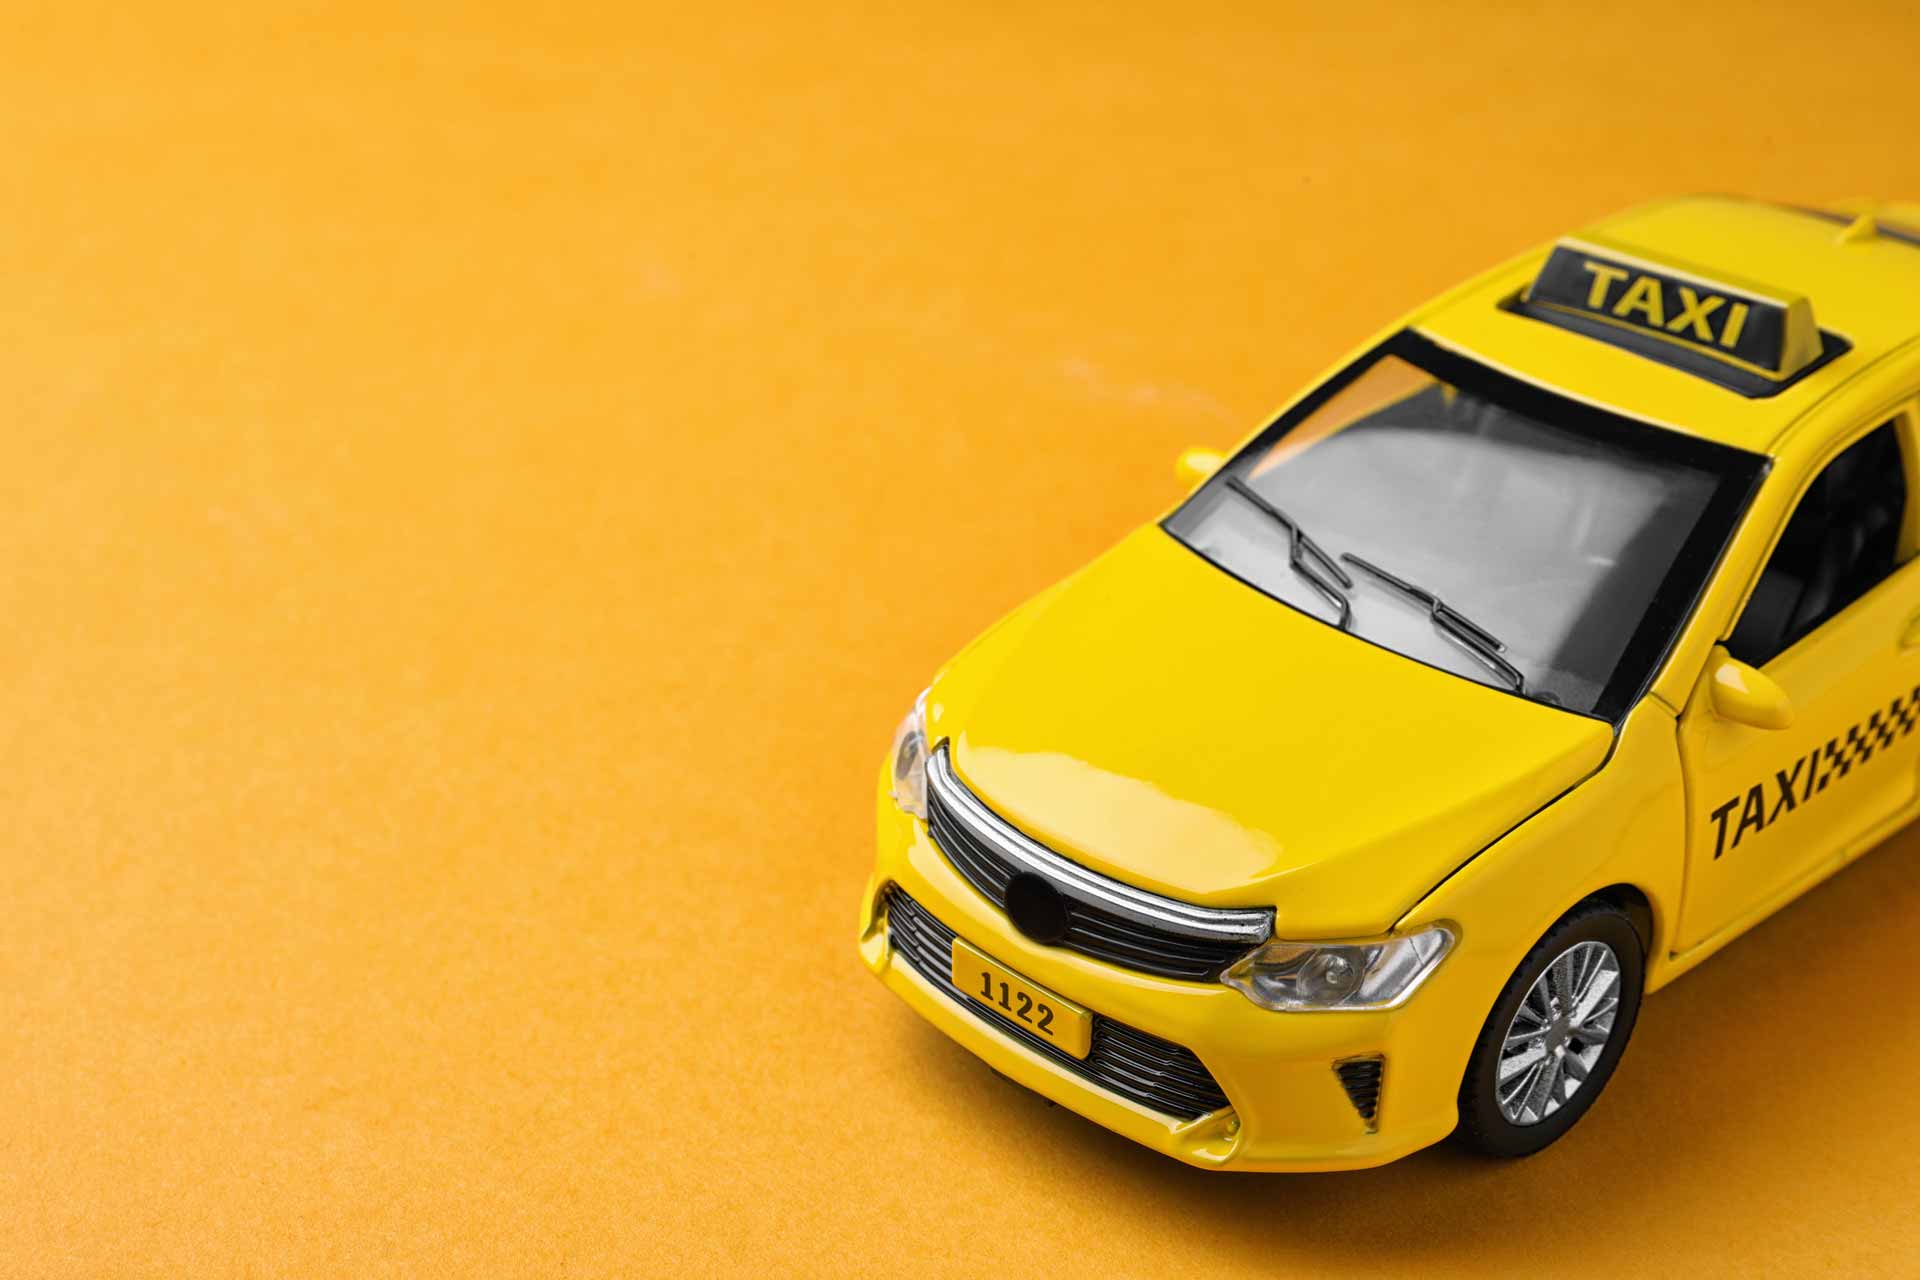 Toy taxi cab on solid yellow background